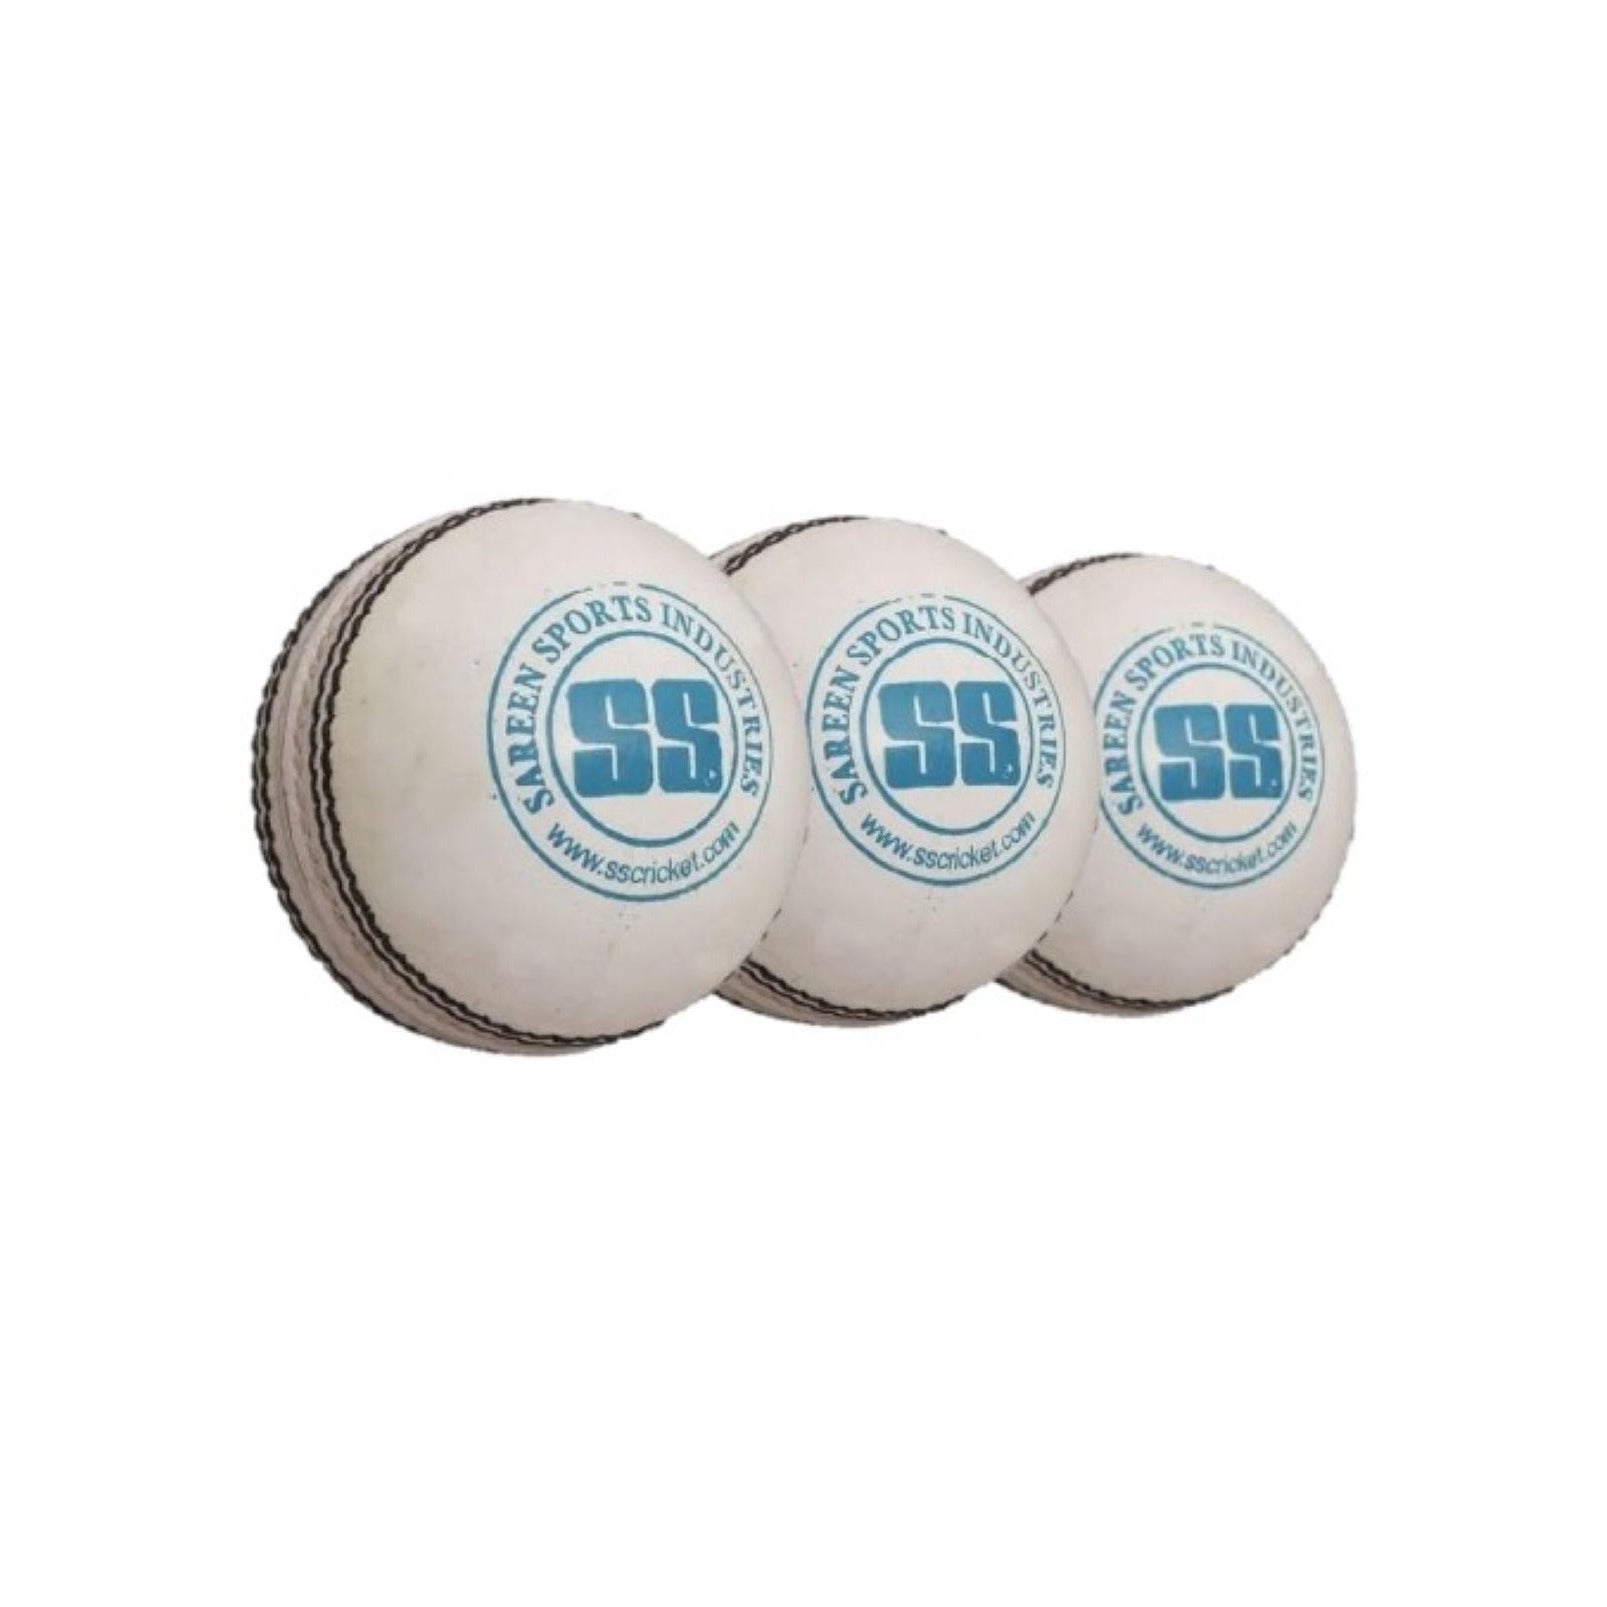 SS County White Cricket Ball (Pack of 3)